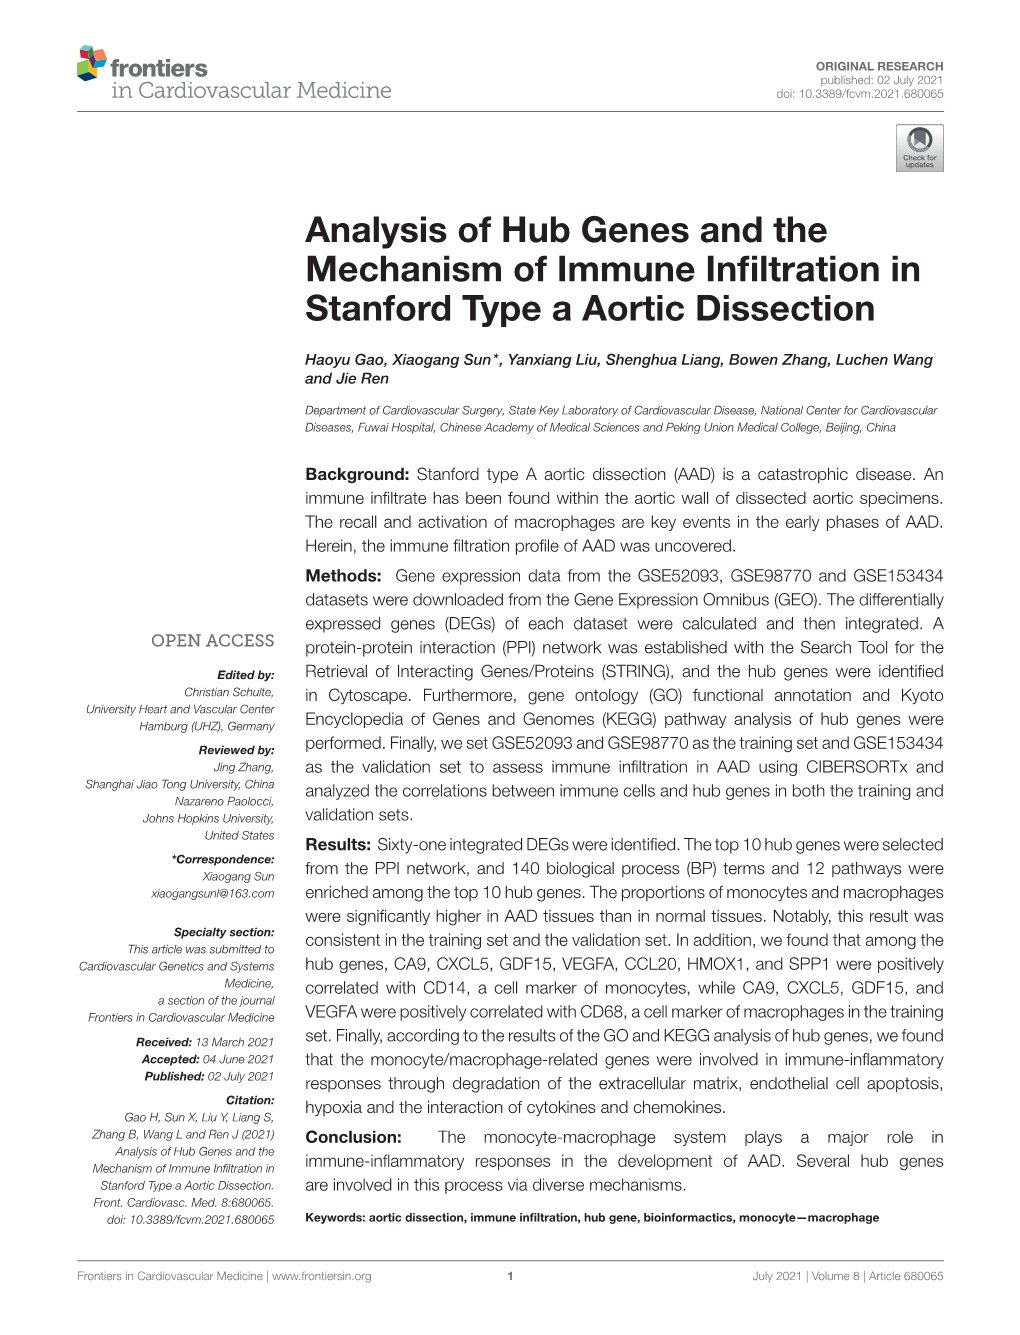 Analysis of Hub Genes and the Mechanism of Immune Inﬁltration in Stanford Type a Aortic Dissection